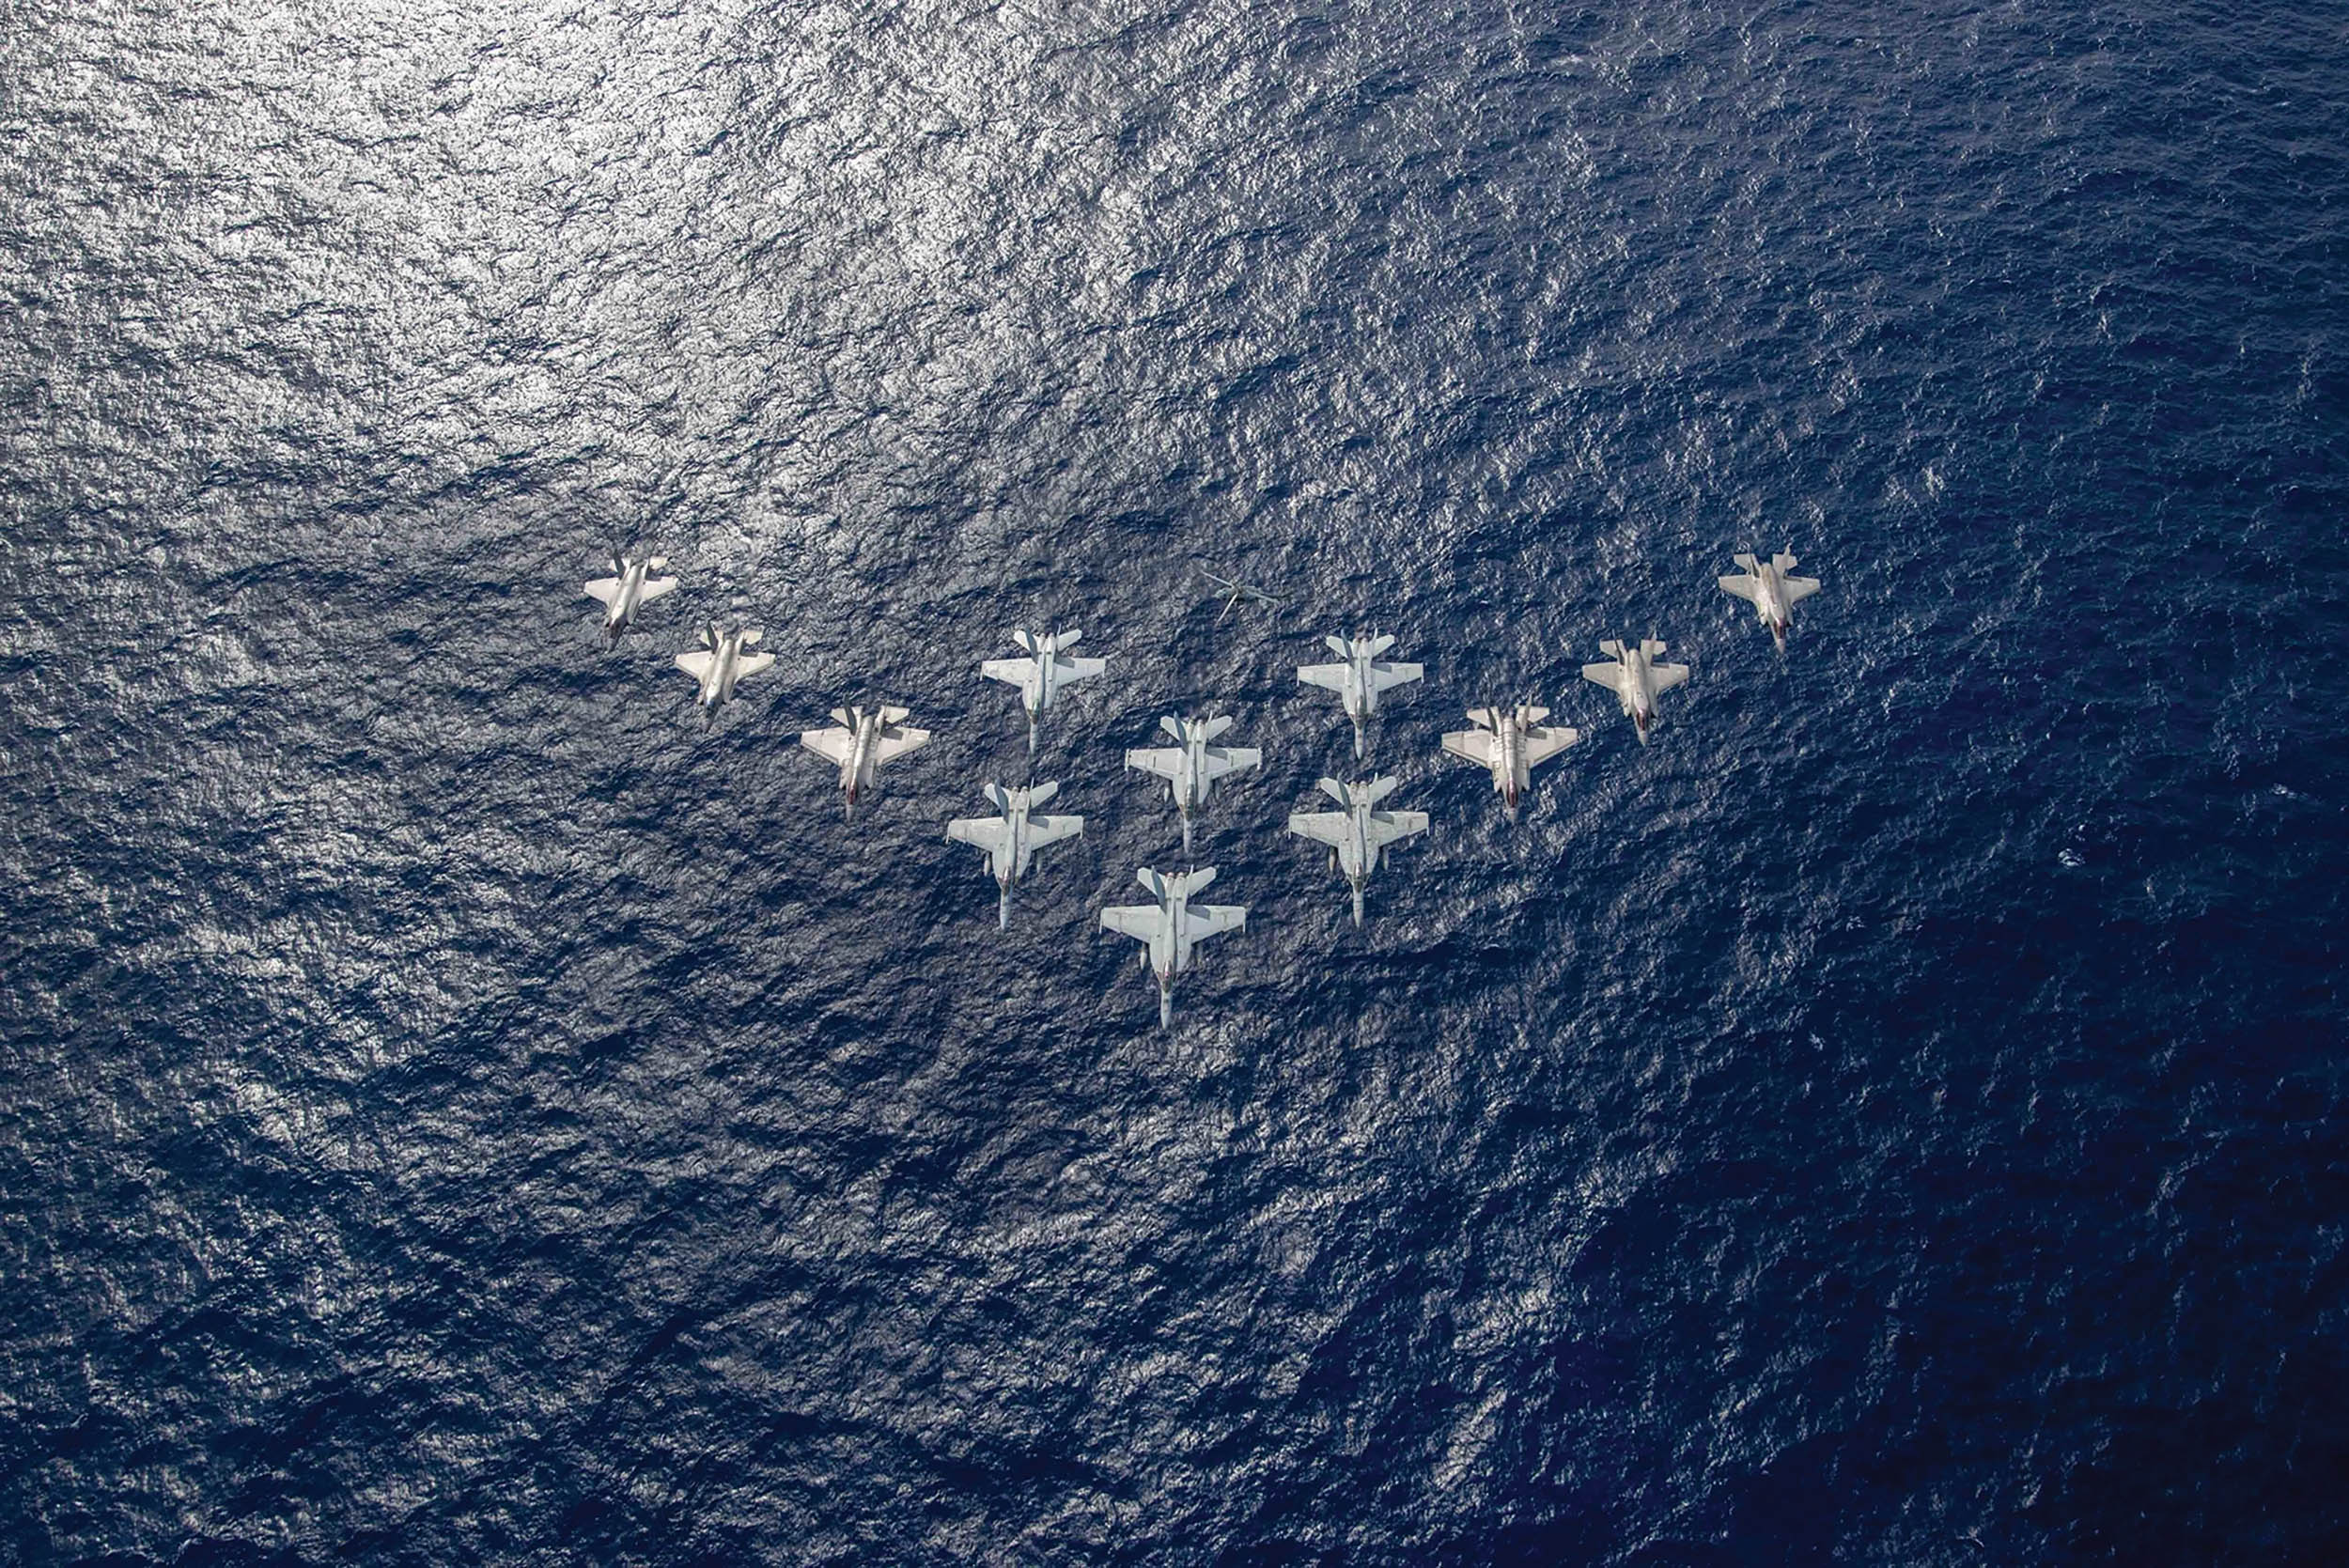 Aircraft from United Kingdom’s carrier strike group led by HMS Queen Elizabeth, and U.S. Navy carrier strike groups led by flagships USS Ronald Reagan and USS Carl Vinson, fly in formation during carrier strike group operations in Philippine Sea